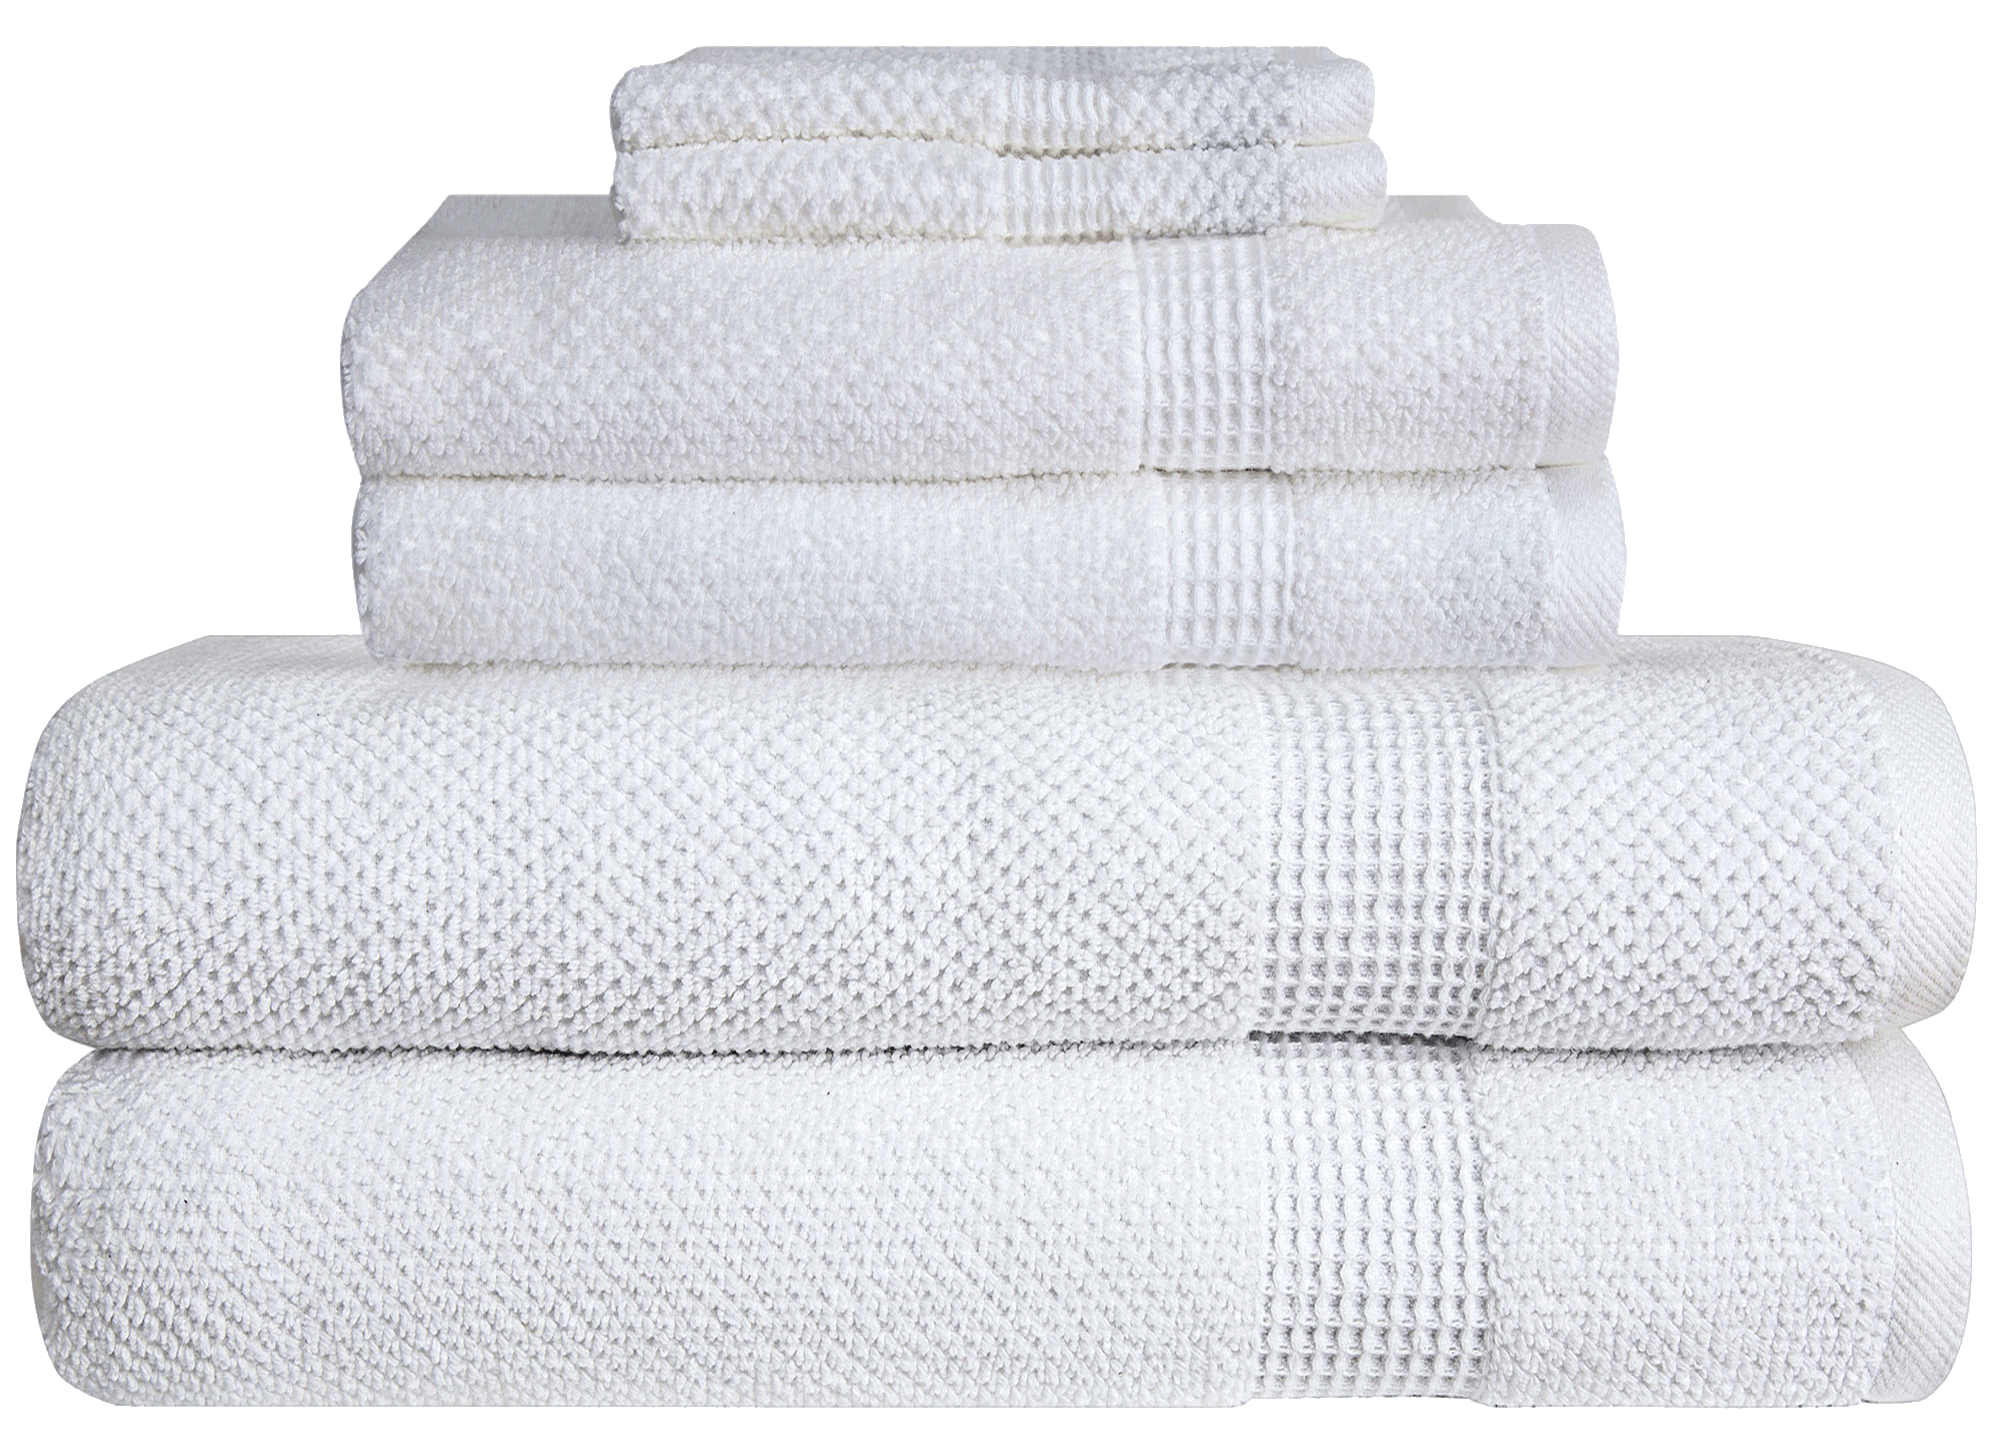 Buy Luxury Bath Towels Set: Style & Comfort Together – Bumble Towels